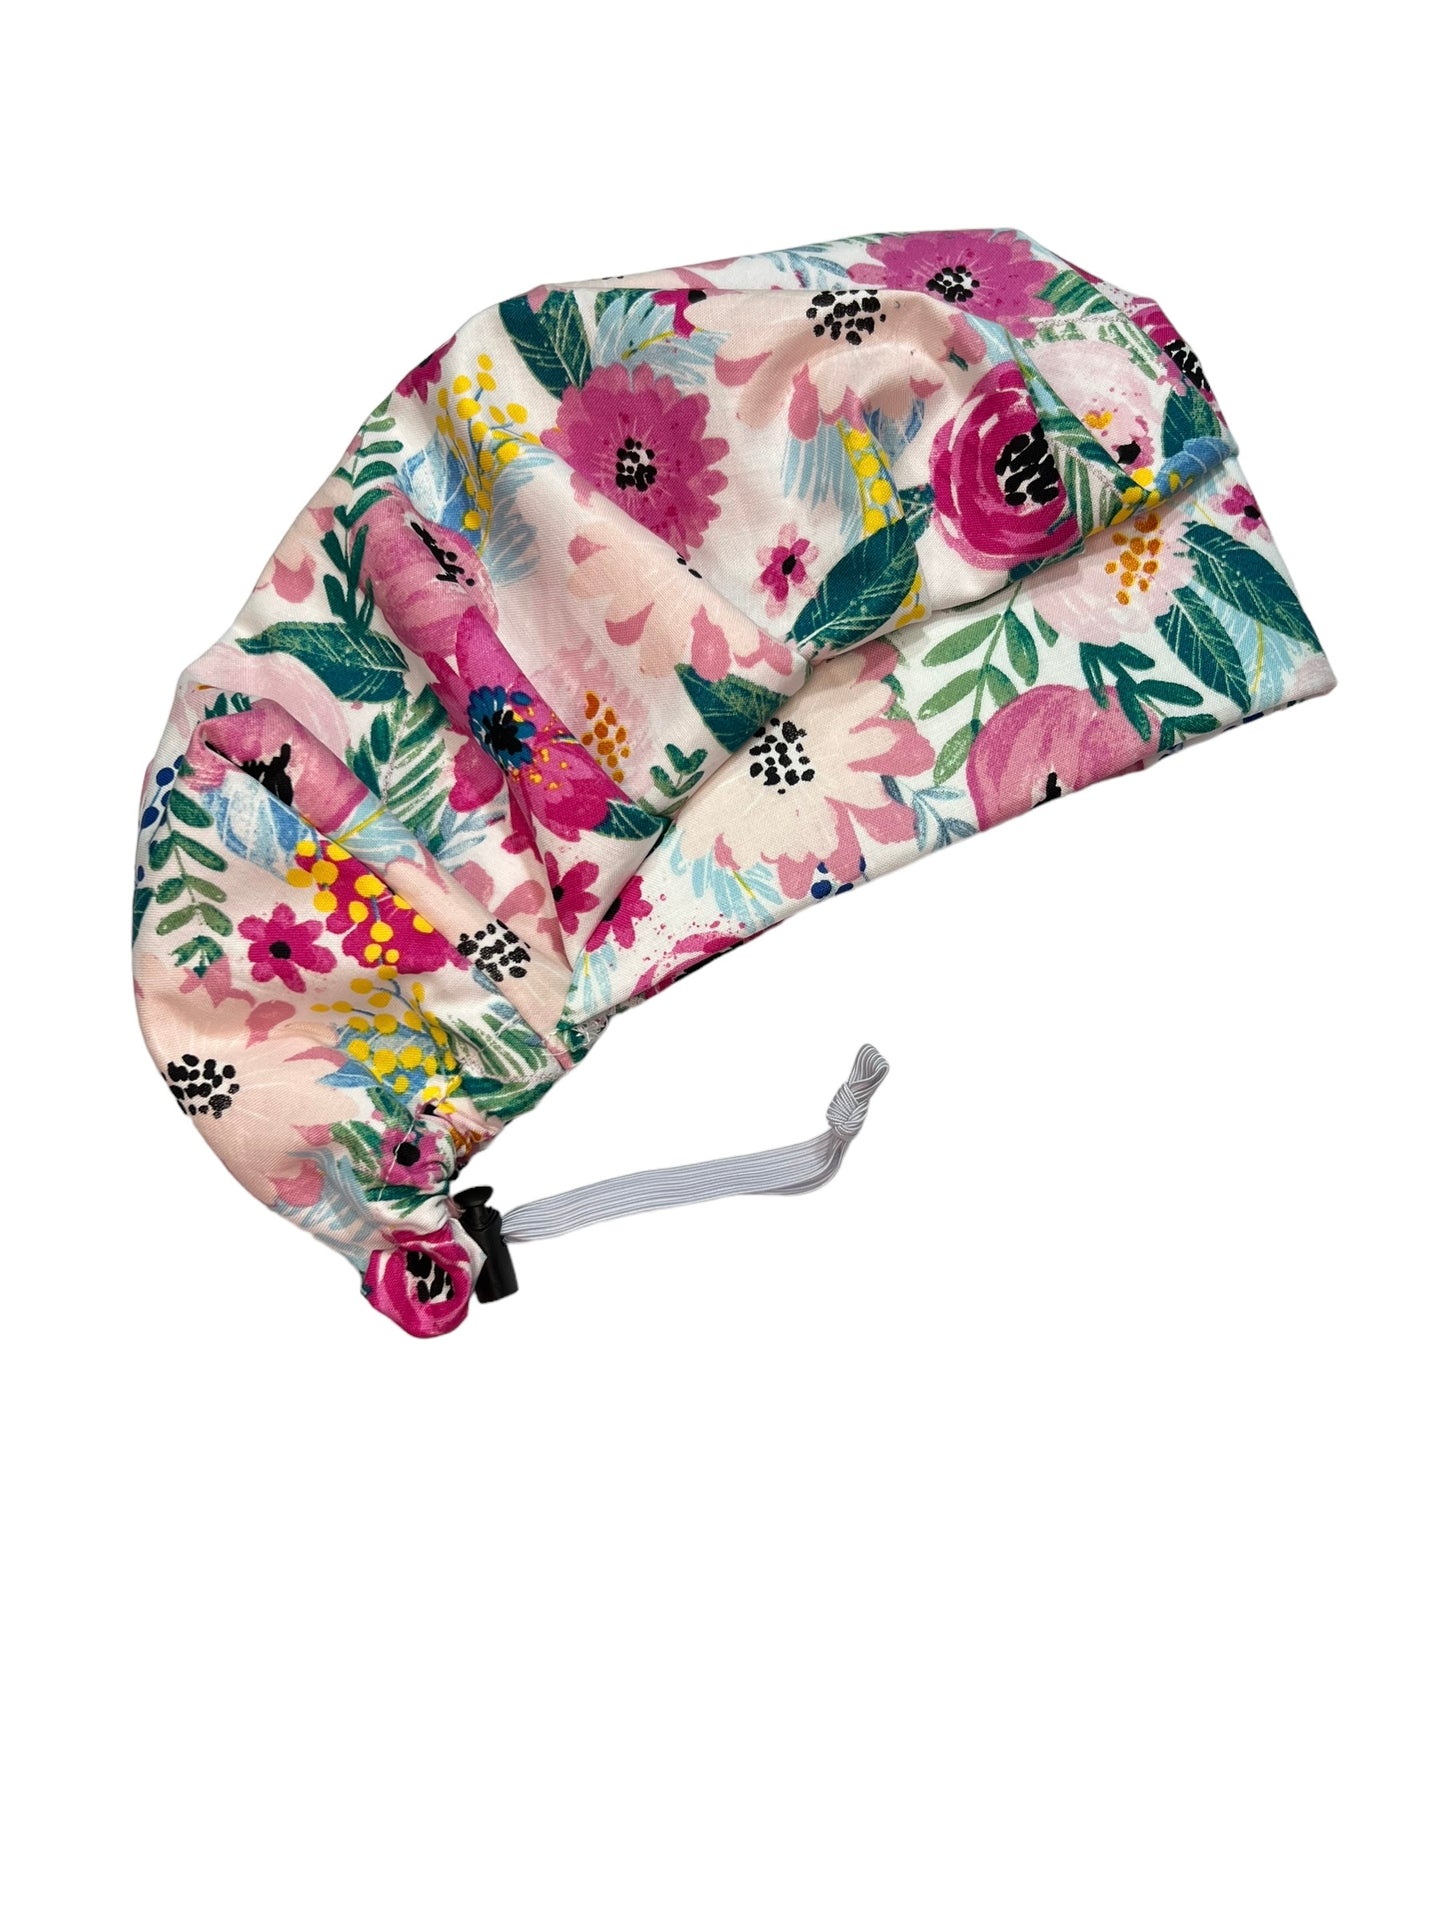 Bouffant Scrub Hat-Berry Floral (Satin Option Available)